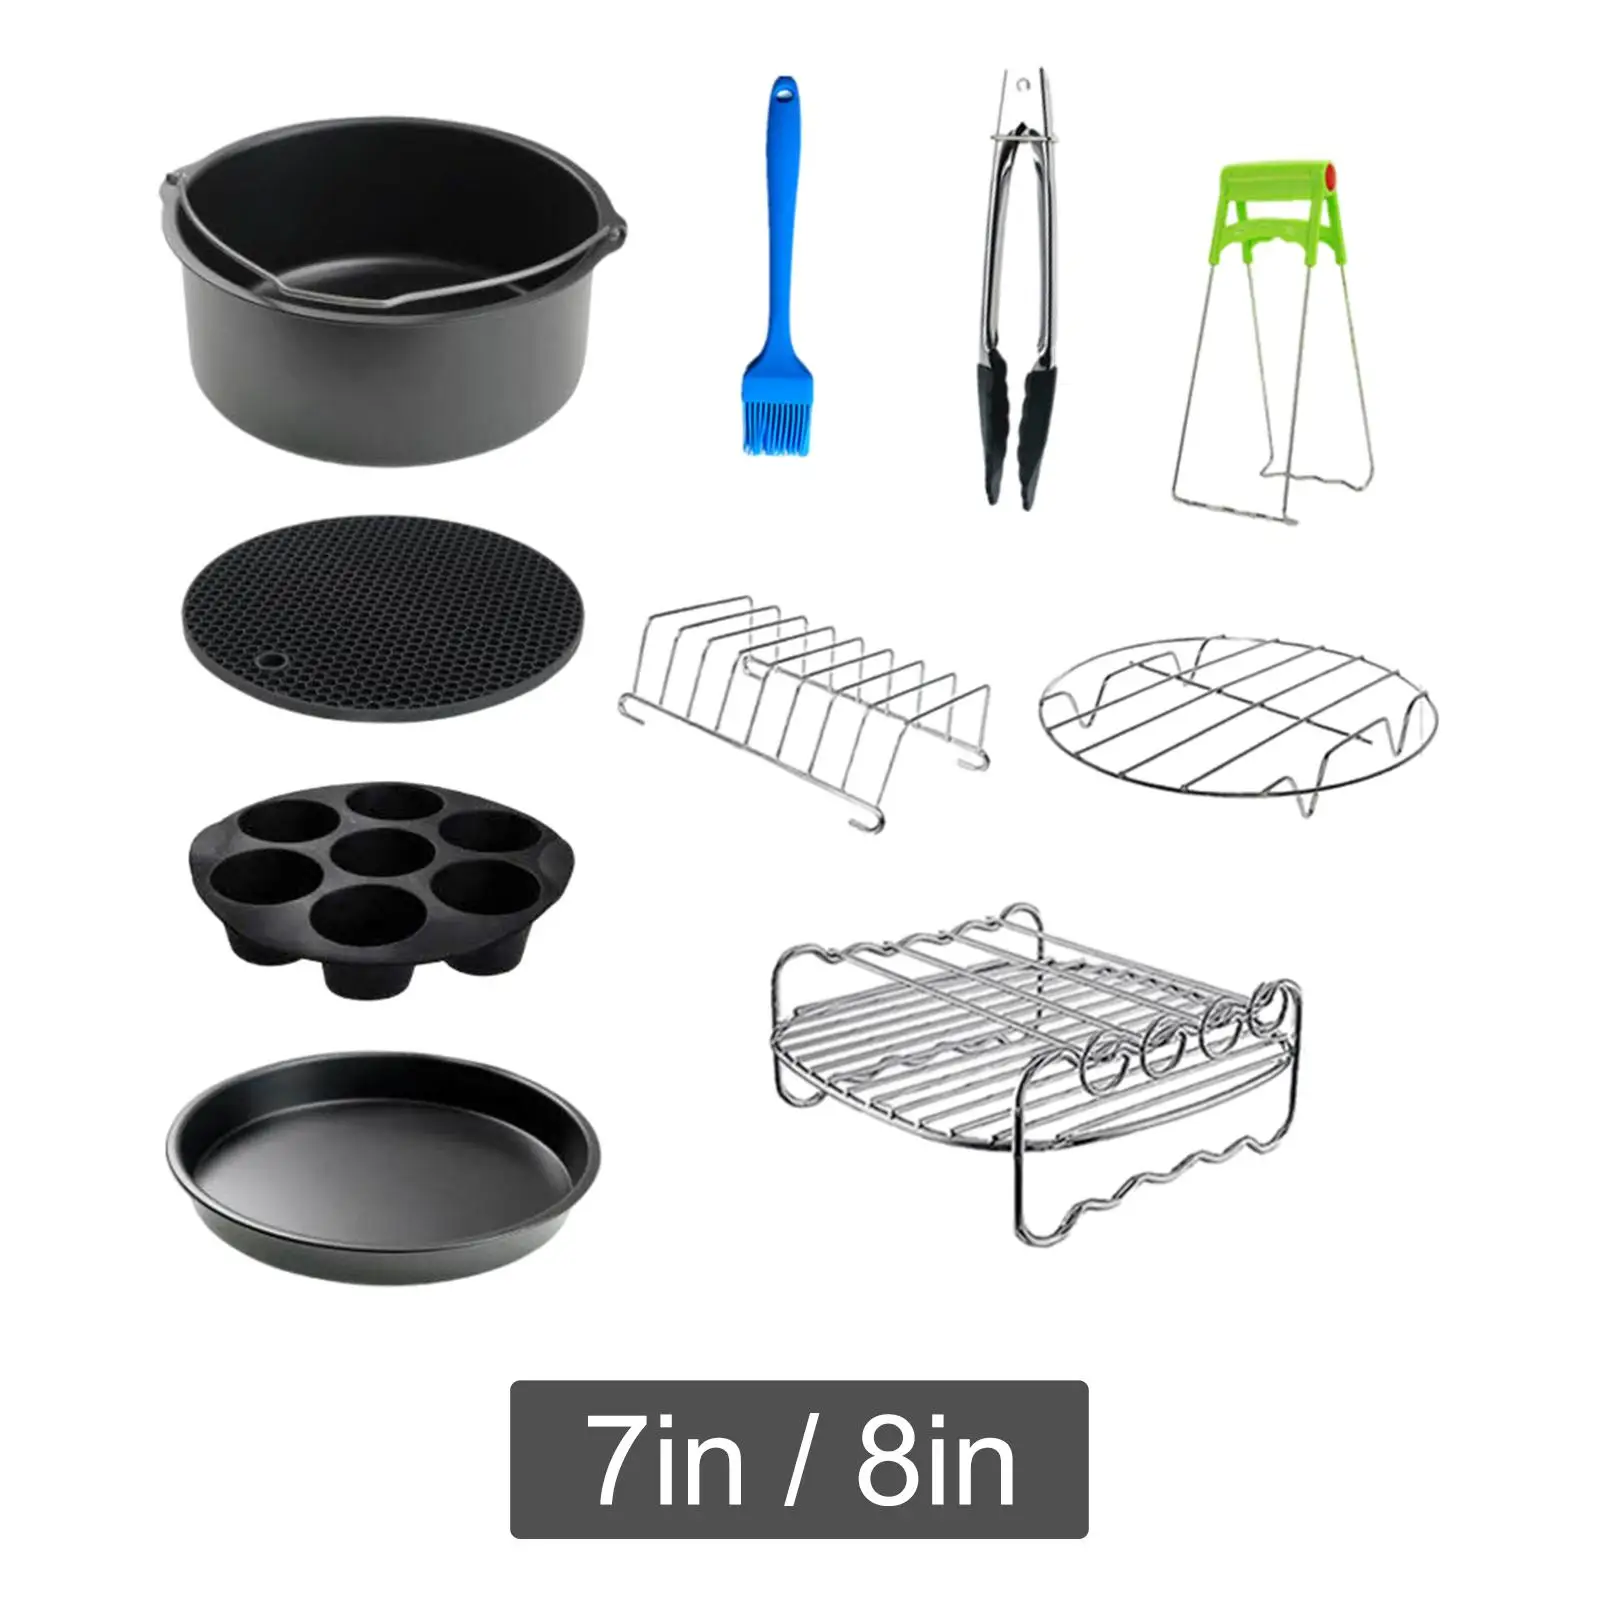 10 Pieces Air Fryer Accessories Set Cake Basket Hot Plate Gripper for Home Kitchen